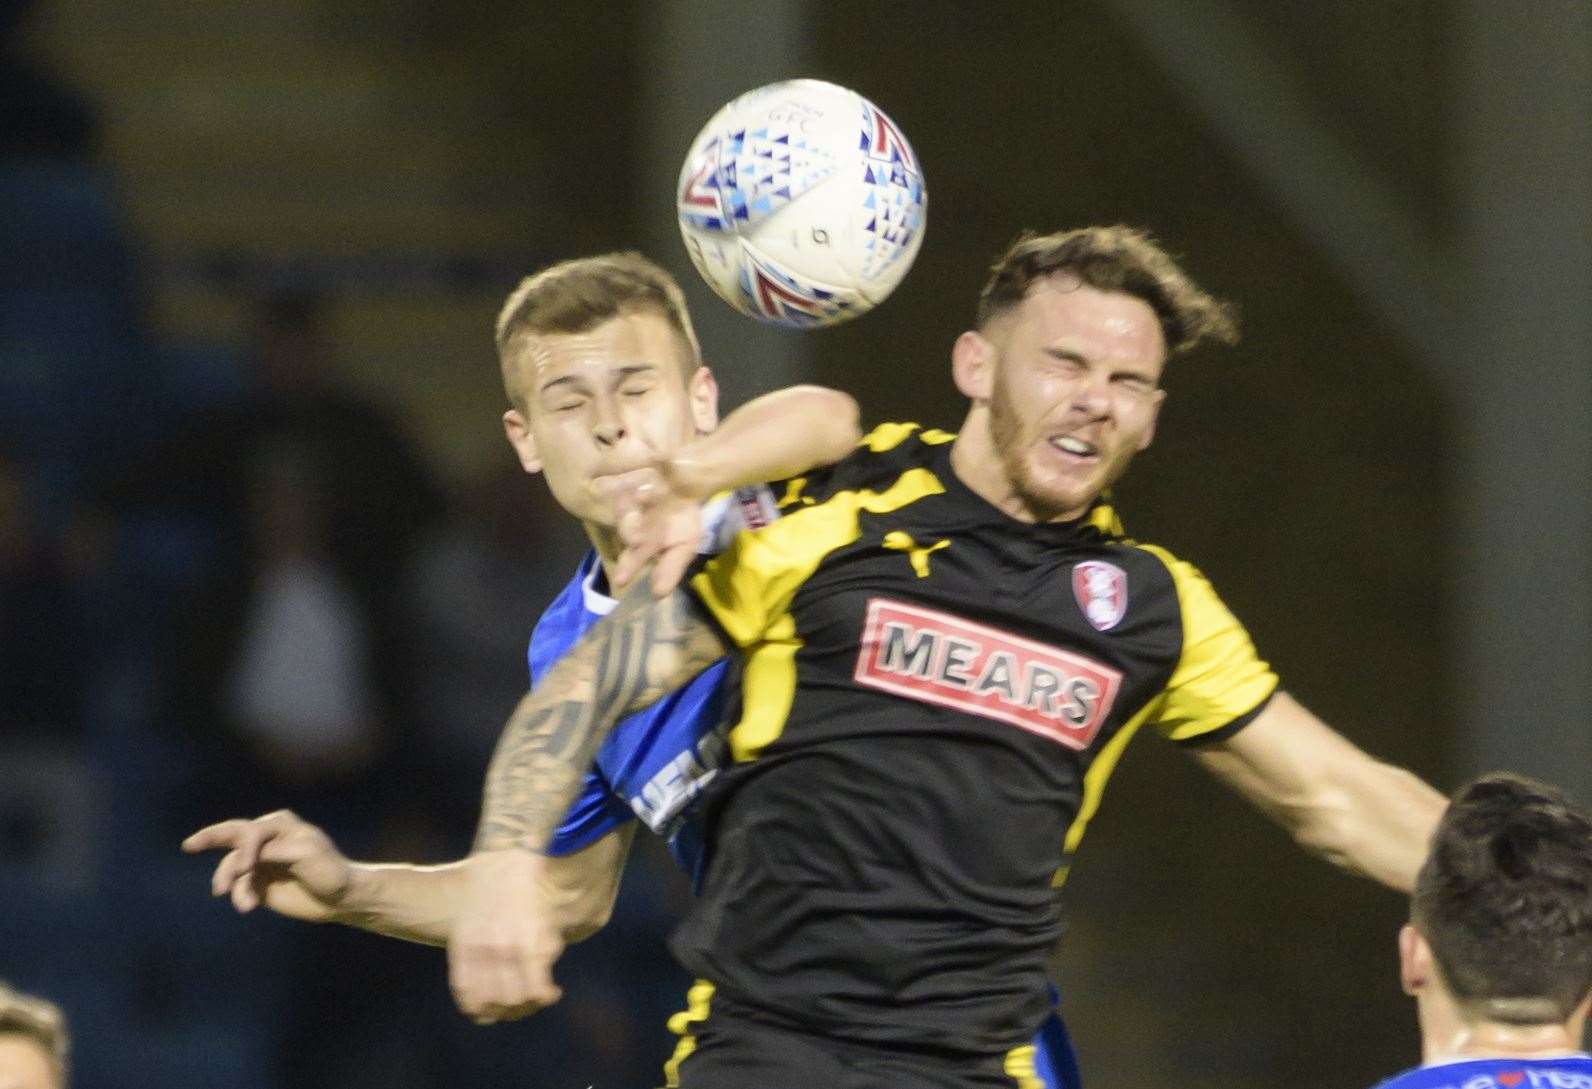 Jake Hessenthaler challenges for the ball in a game for the Gills back in 2018 Picture: Andy Payton